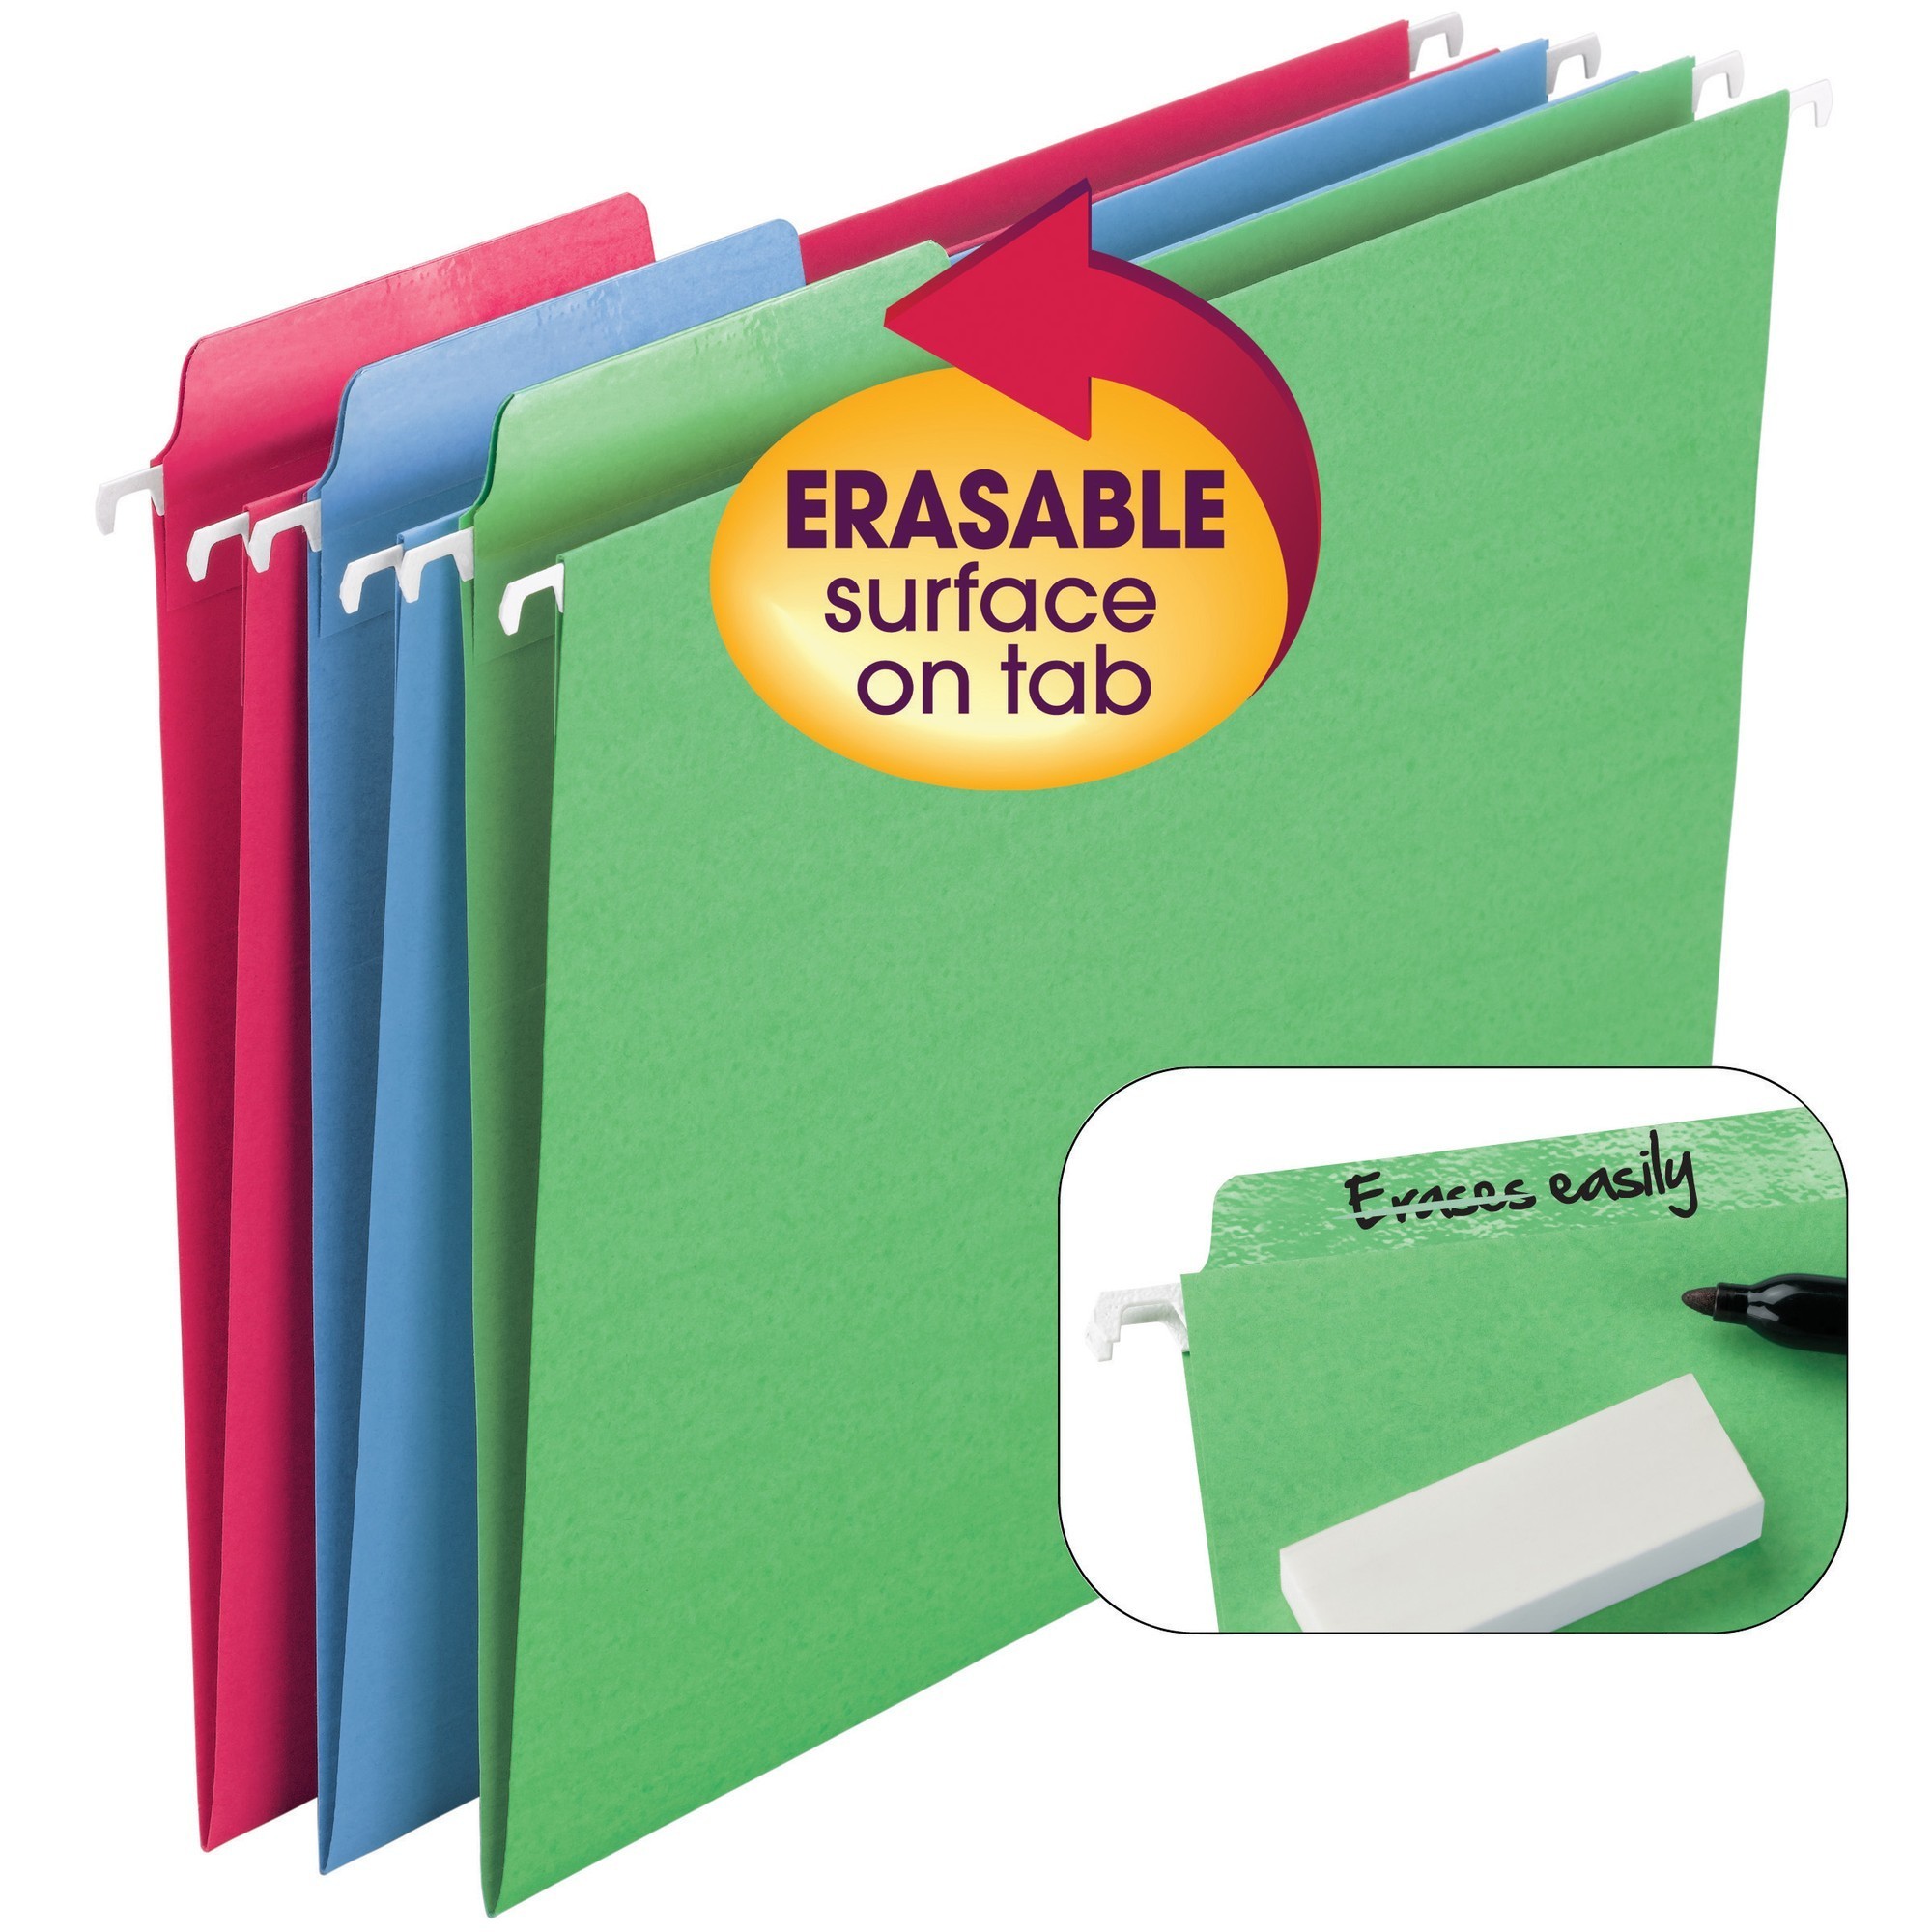 Erasable FasTab Hanging File Folder, 1/3-Cut Built-In Tab, Letter Size, Assorted Colors, Box of 18